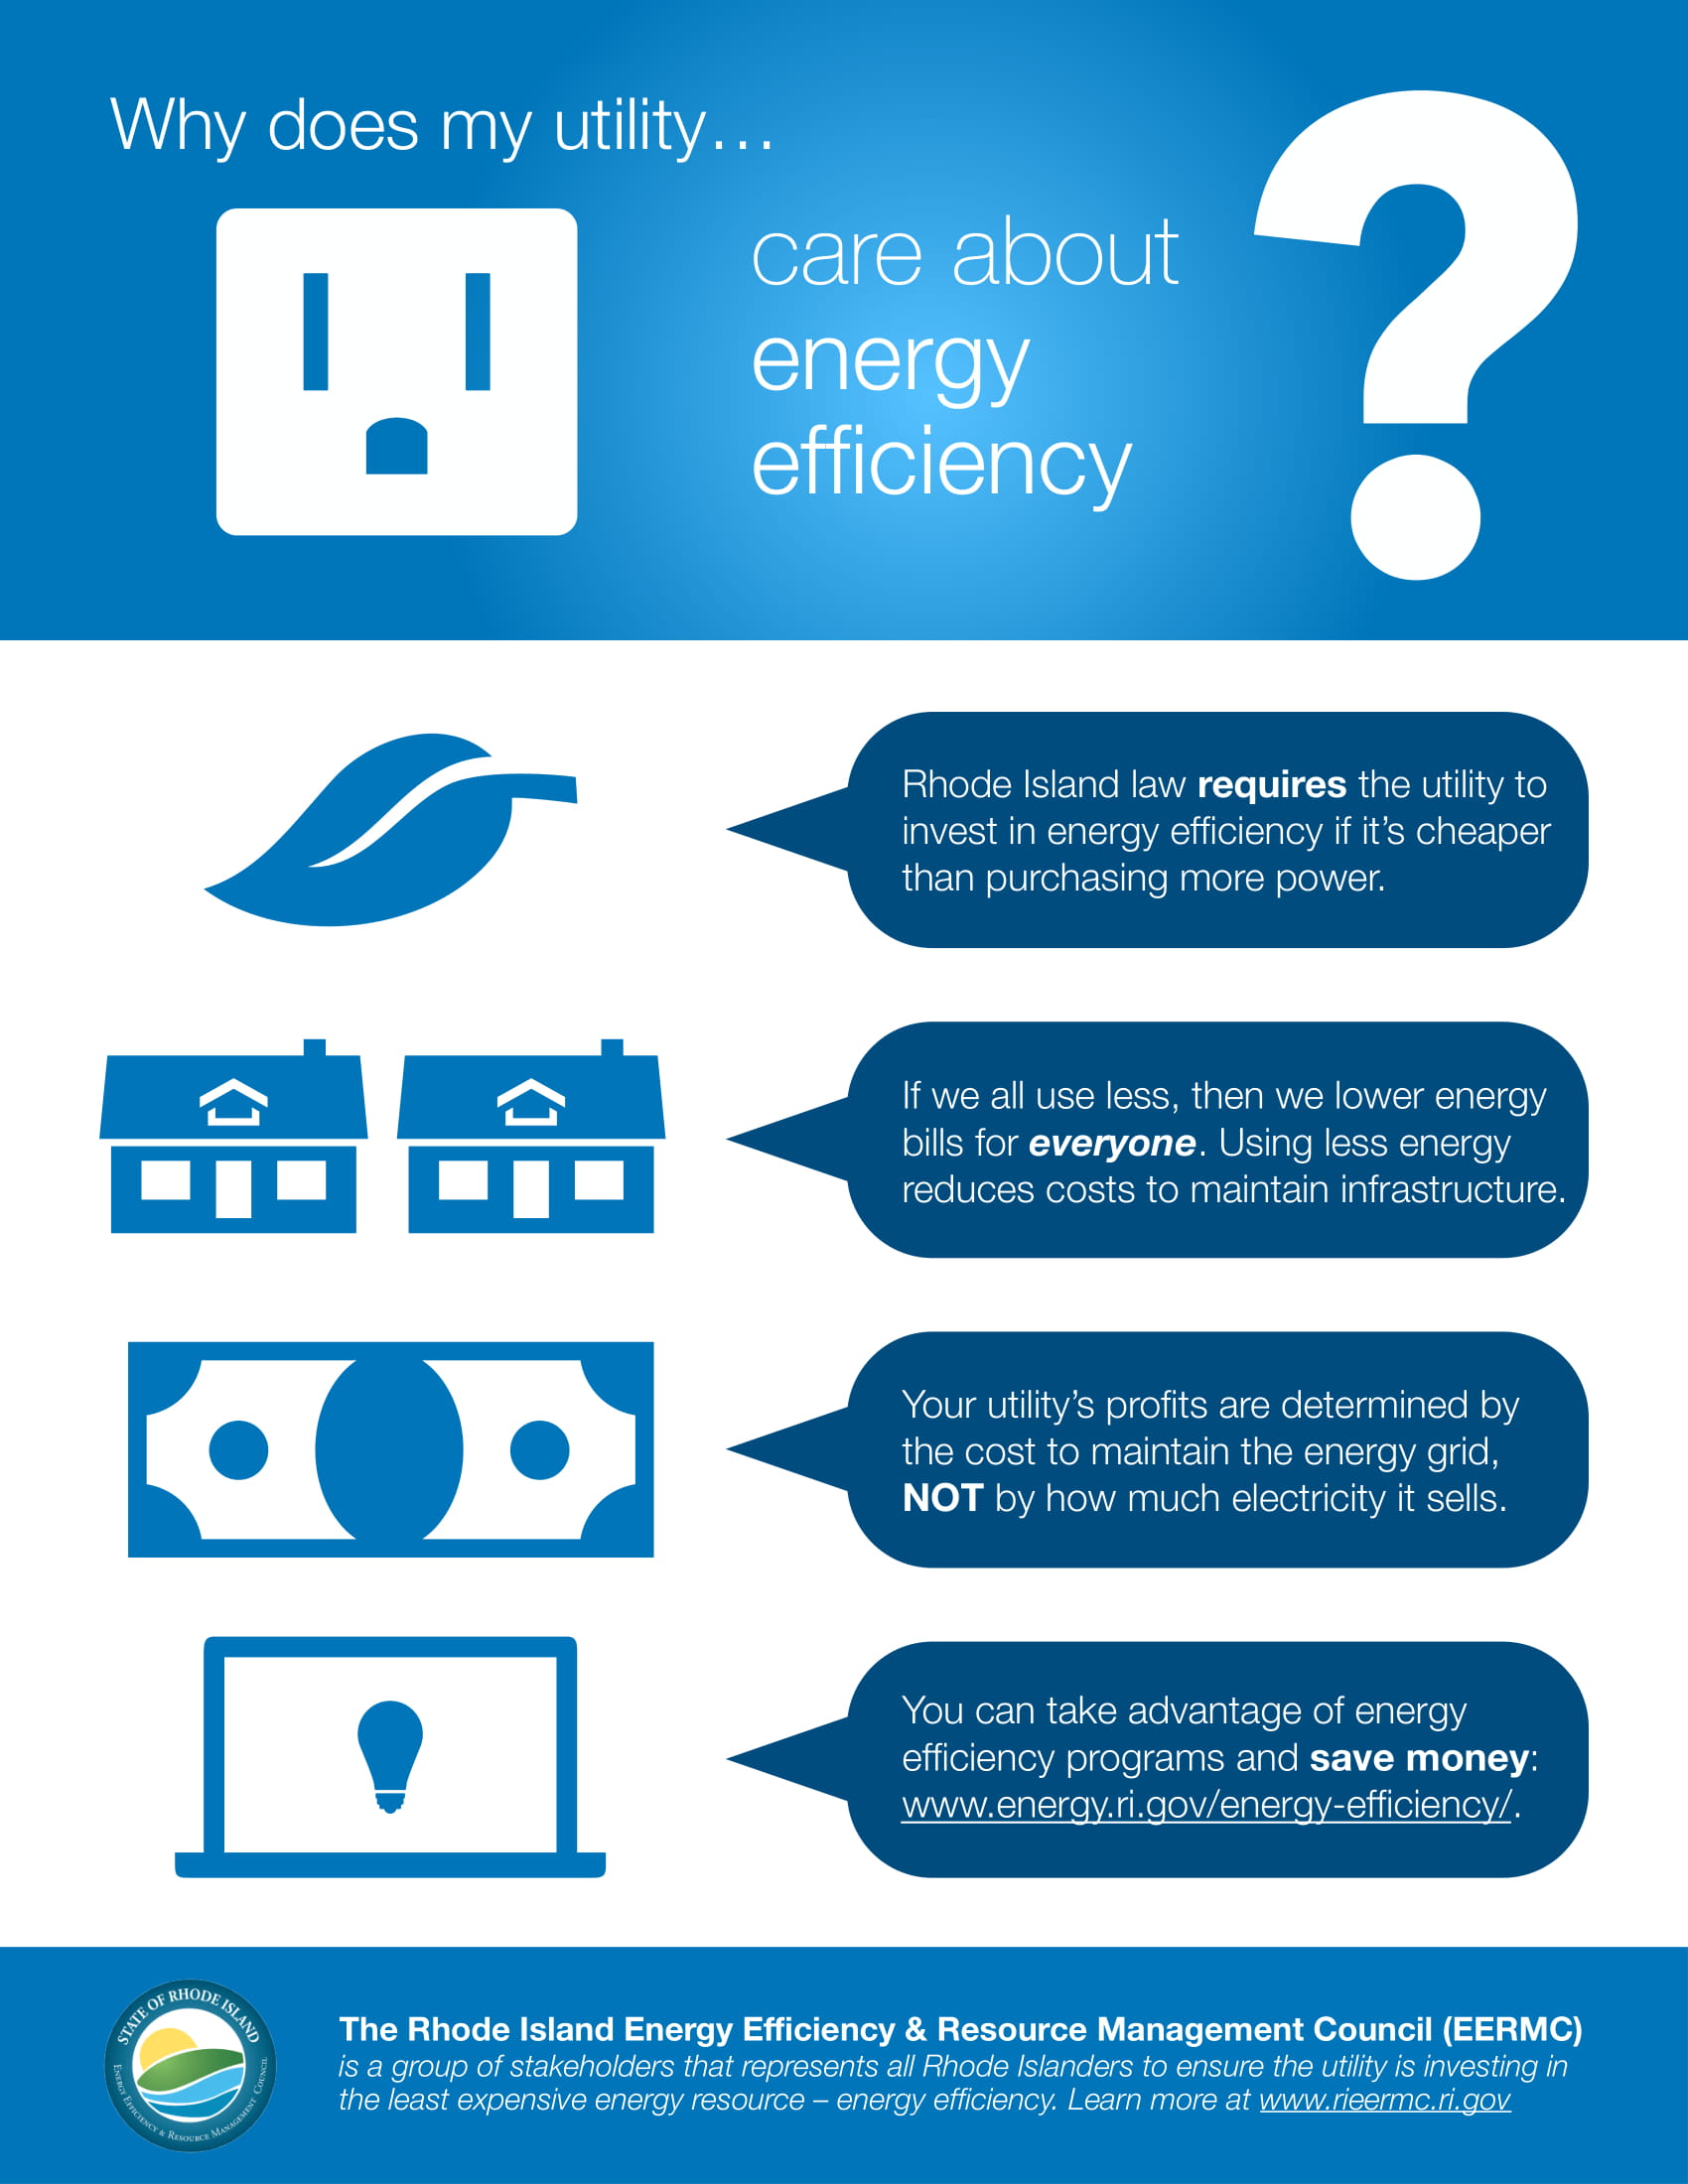 why-does-my-utility-care-about-energy-efficiency-1